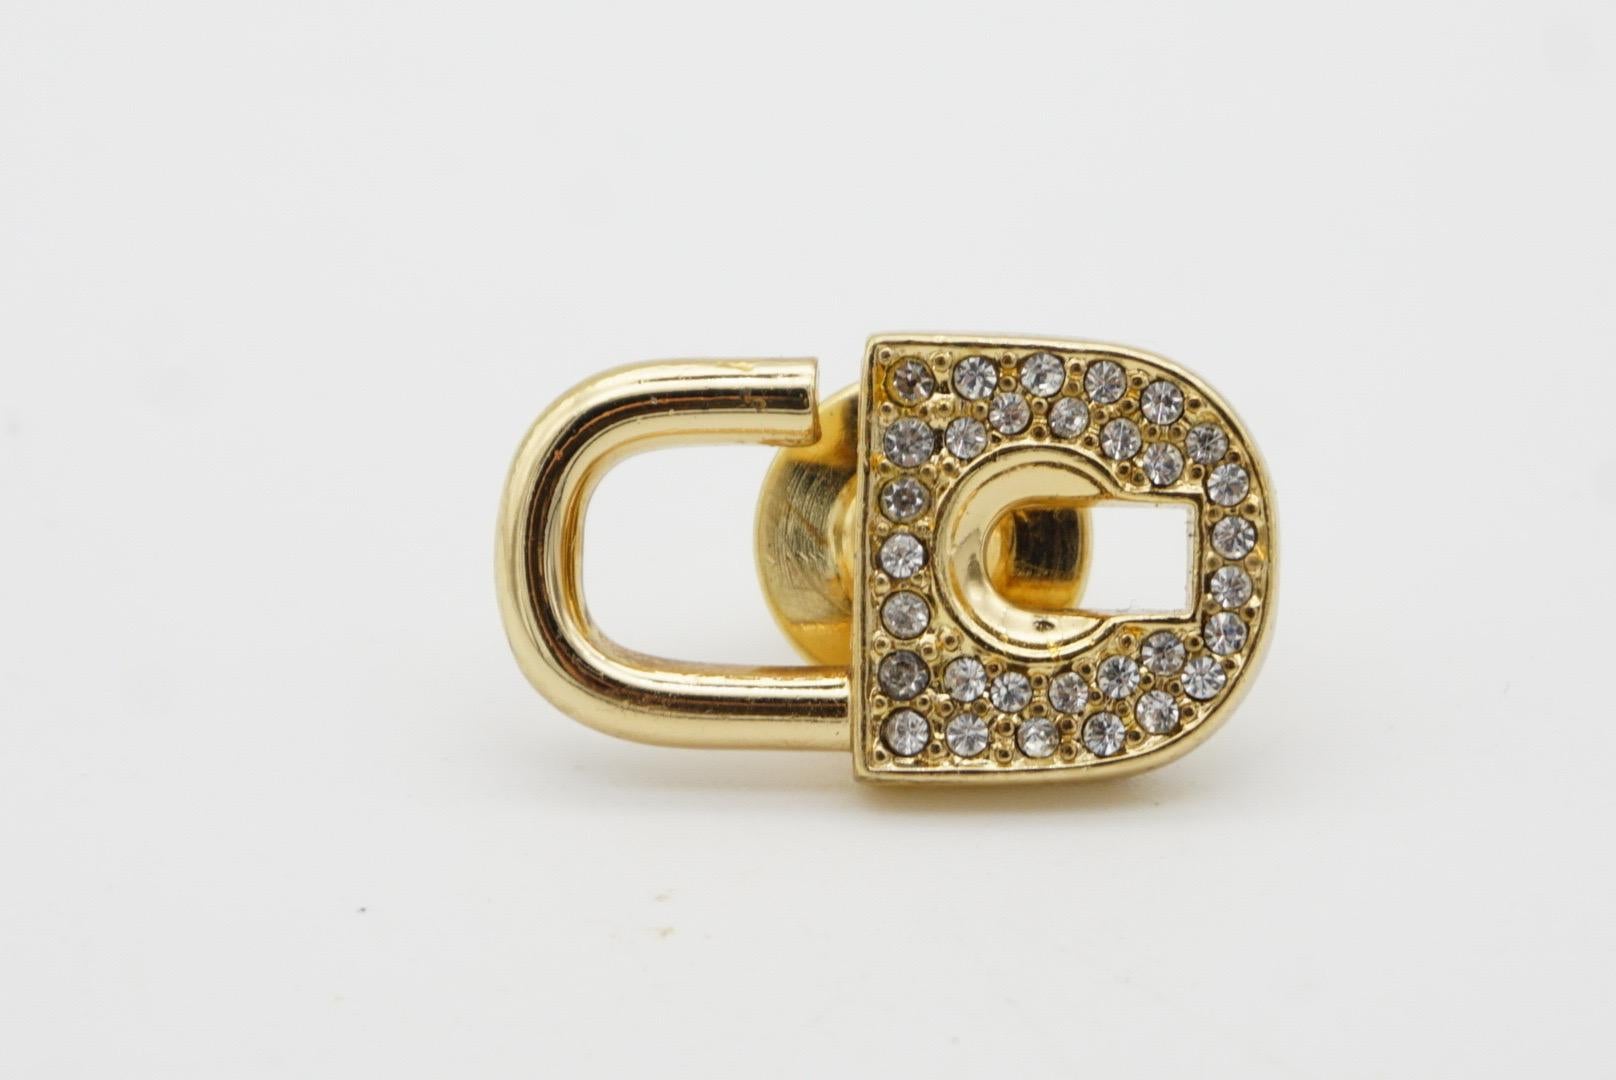 Very good condition. Very light scratches, barely noticeable. 100% genuine.

A unique piece. This is gold plated stylised brooch.

Safety-catch pin closure.

Size: 2.4 cm x 1.4 cm.

Weight: 6.0 g.

_ _ _

Great for everyday wear. Come with velvet